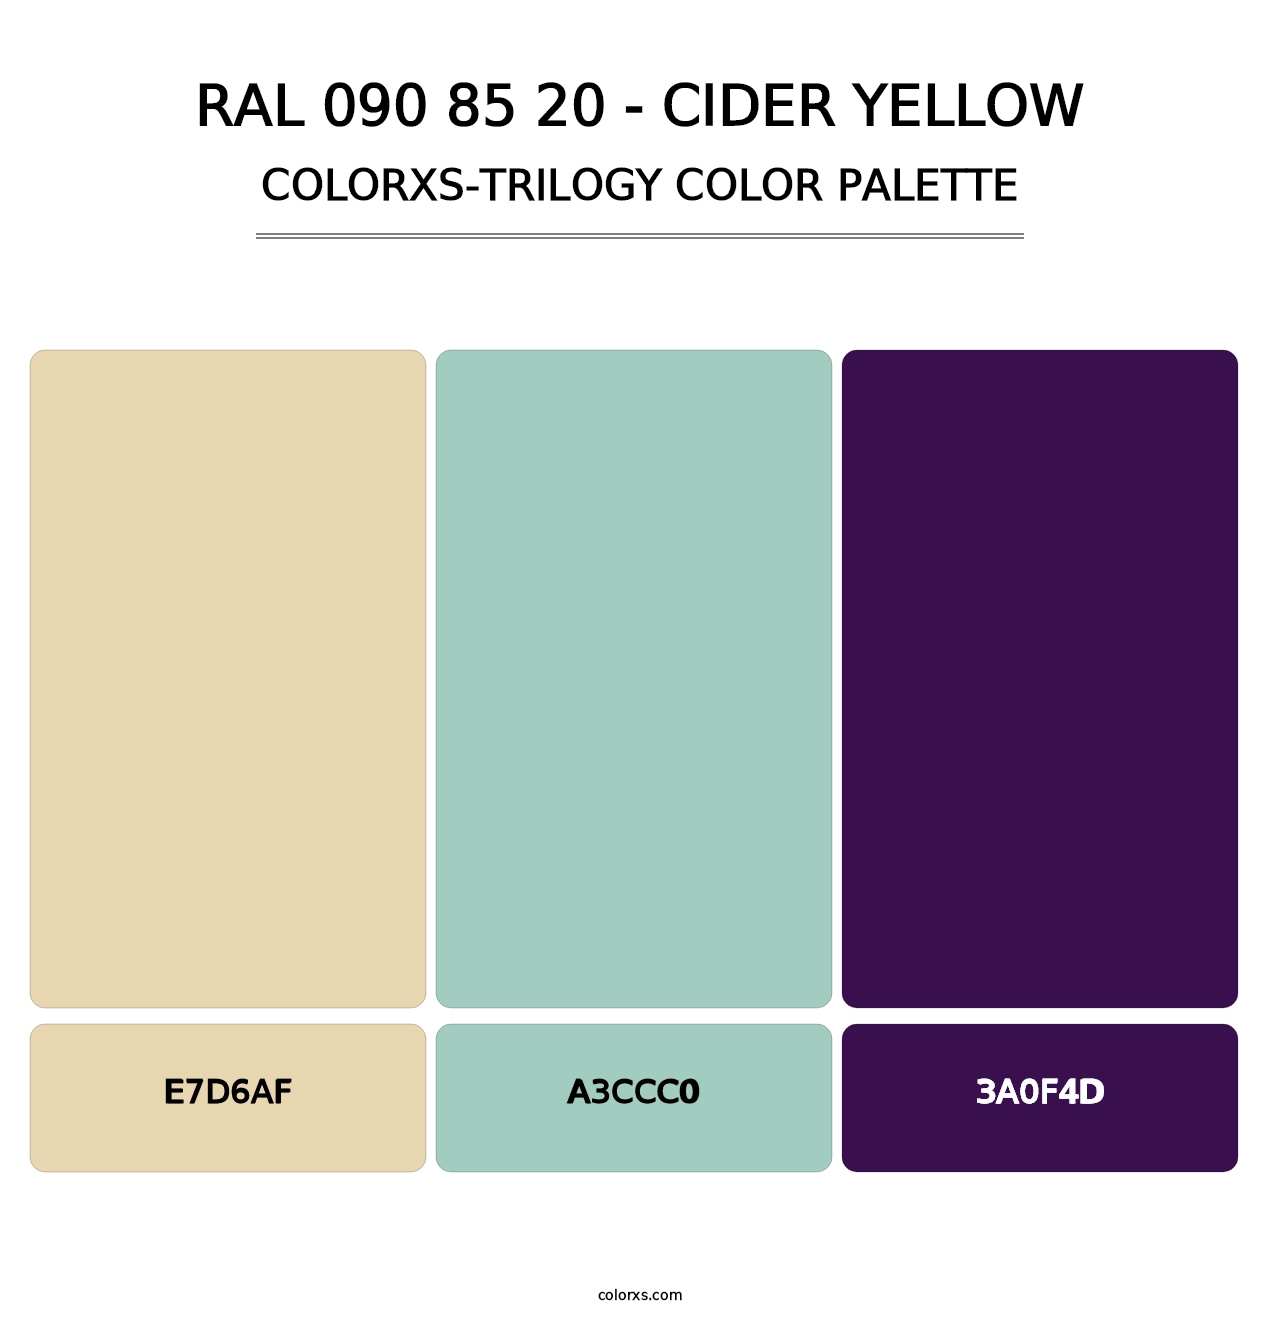 RAL 090 85 20 - Cider Yellow - Colorxs Trilogy Palette